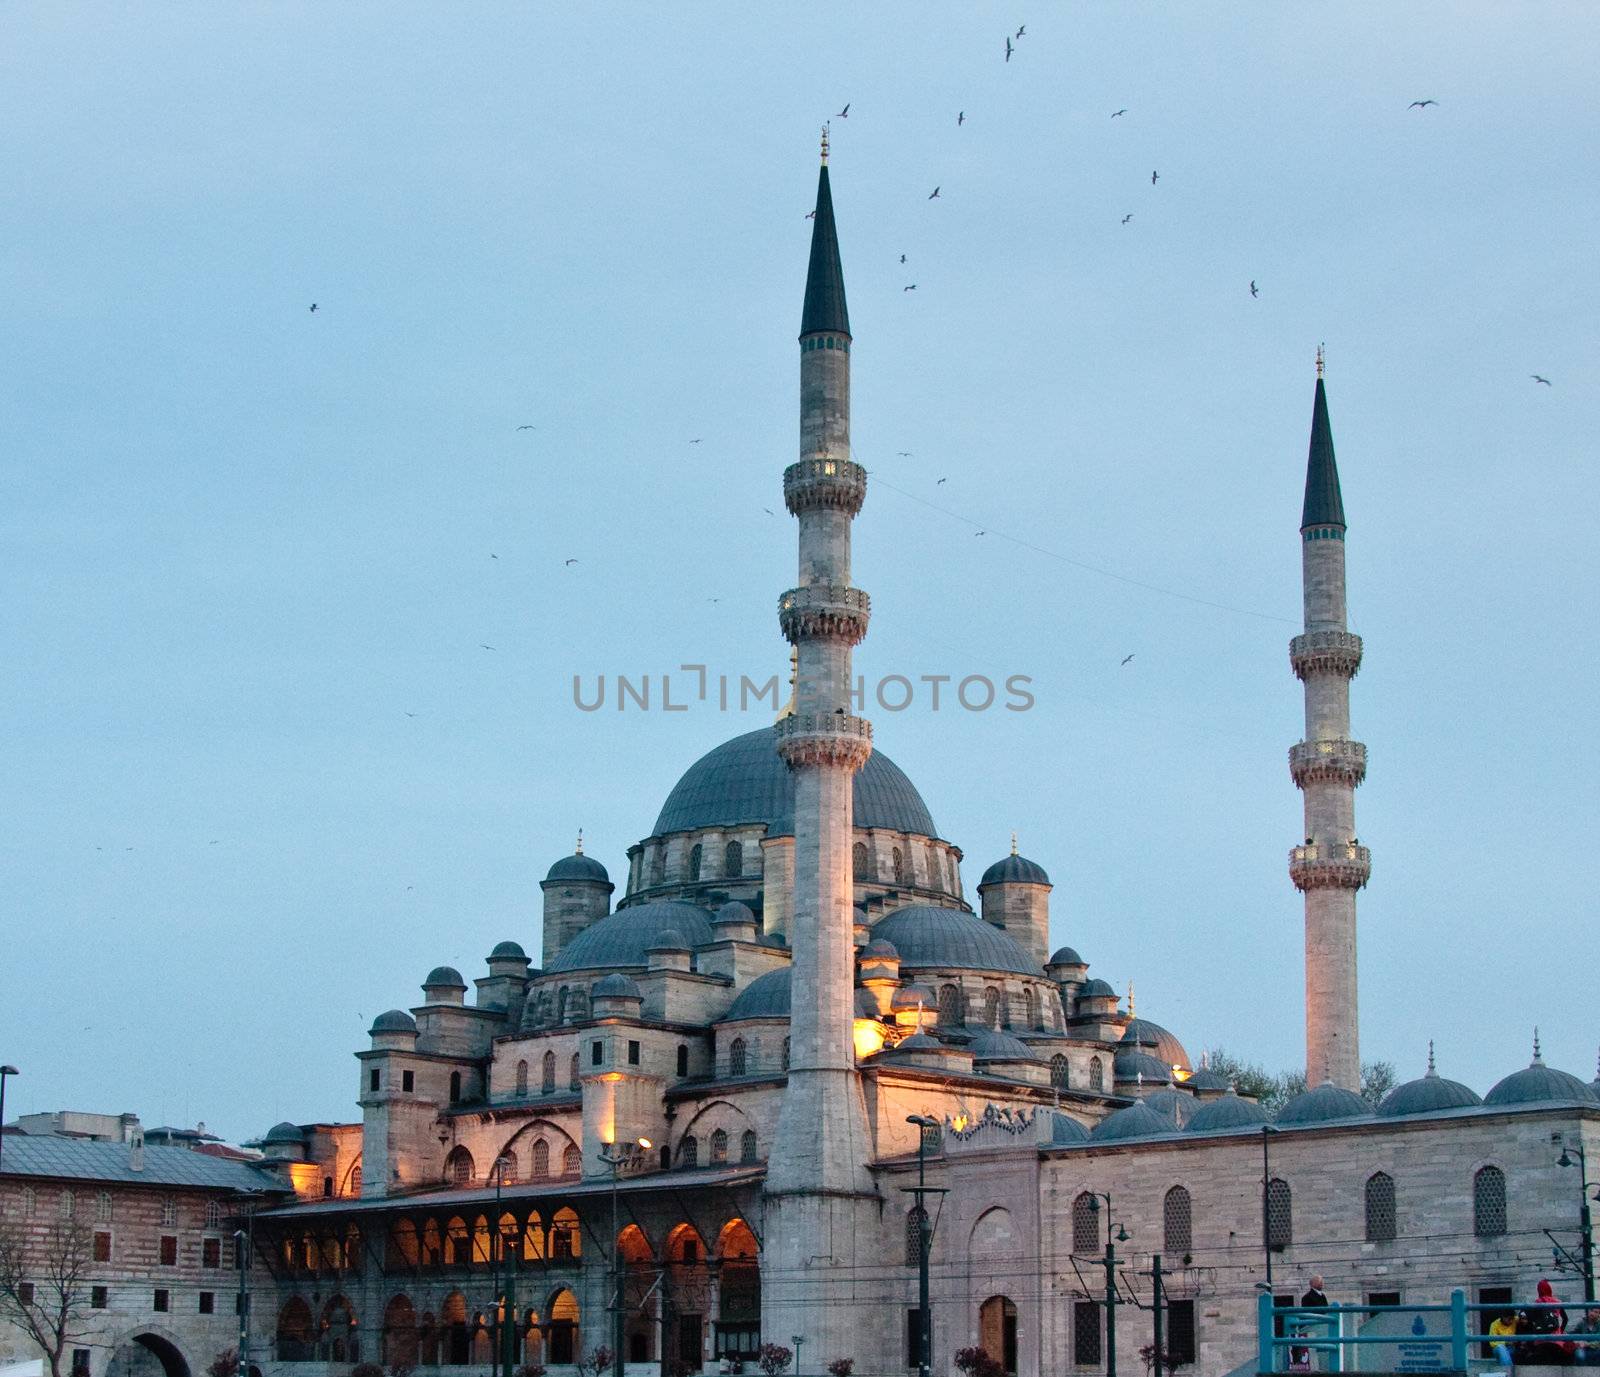 Yeni or New Mosque by Galata bridge in Istanbul by steheap